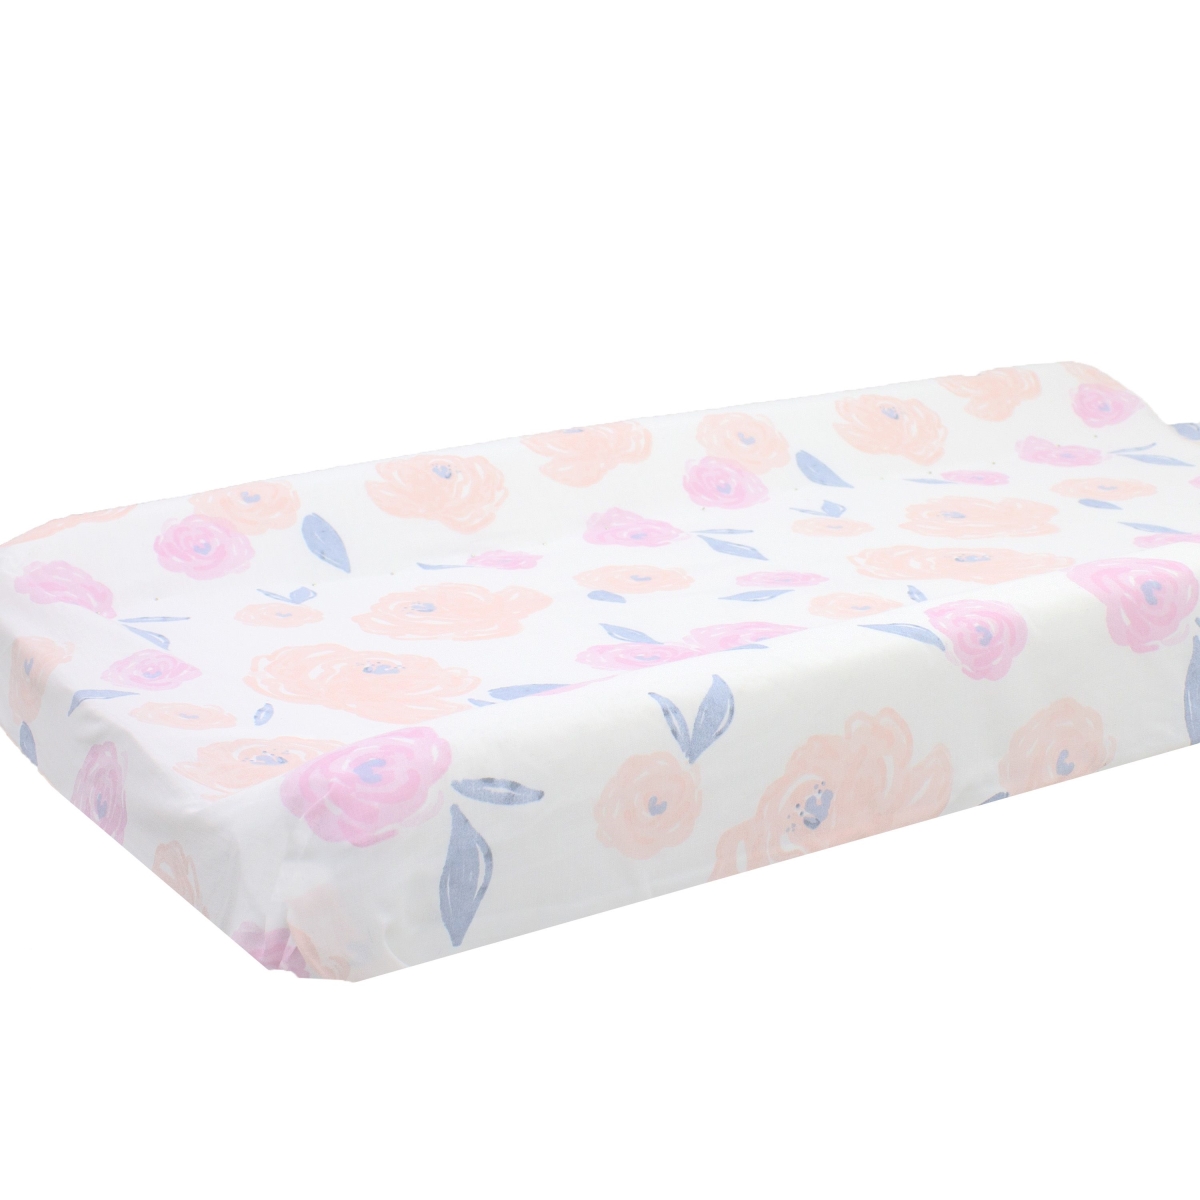 Cpc-rose 32 X 16 X 5 In. Watercolor Rose Changing Pad Cover Multi Color